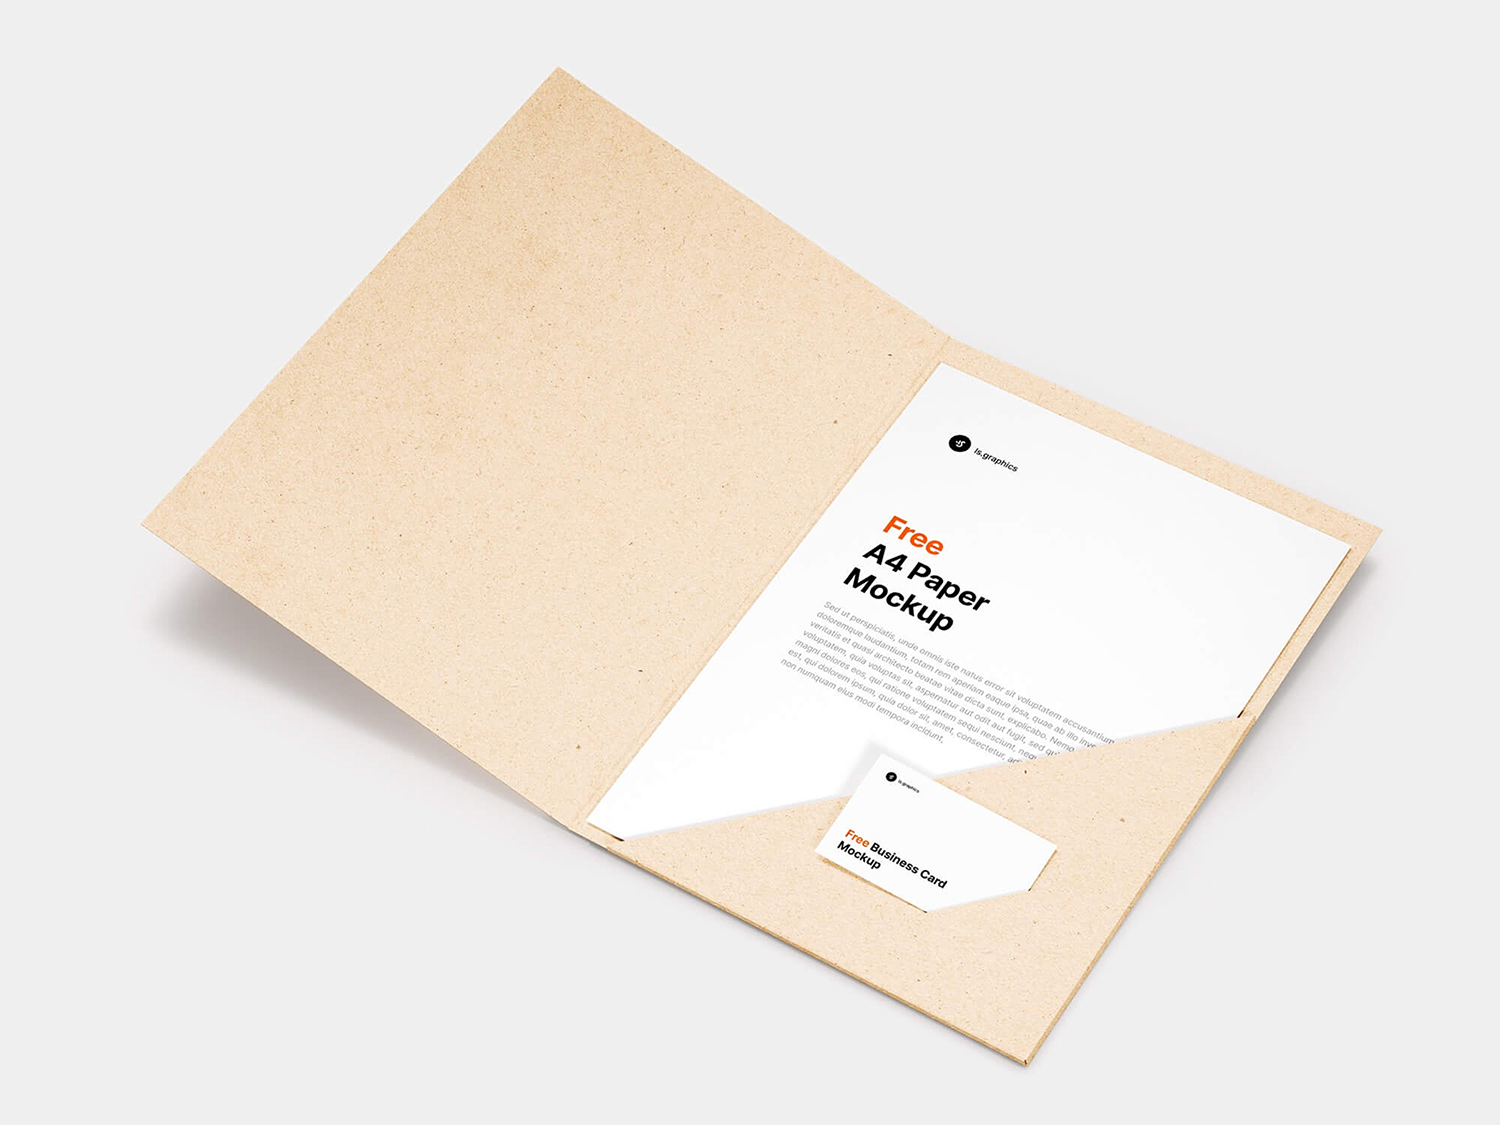 Brand Folder with A4 Paper Mockup